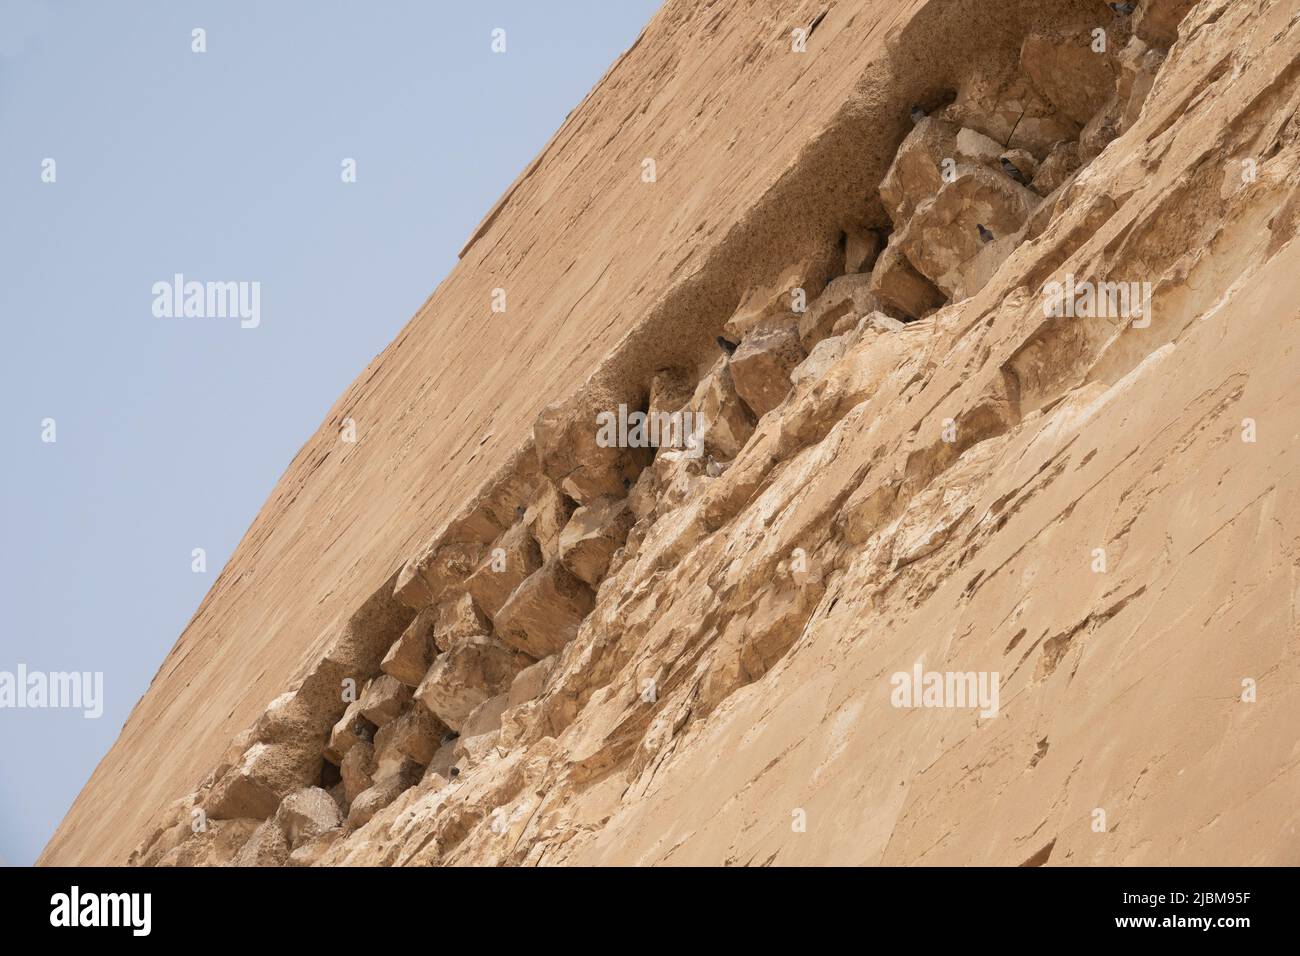 Close up of blocks at the Meidum Pyramid Known as the ‘Collapsed Pyramid of  Meidum  near the Fayoum, Nile Valley, Egypt. Stock Photo